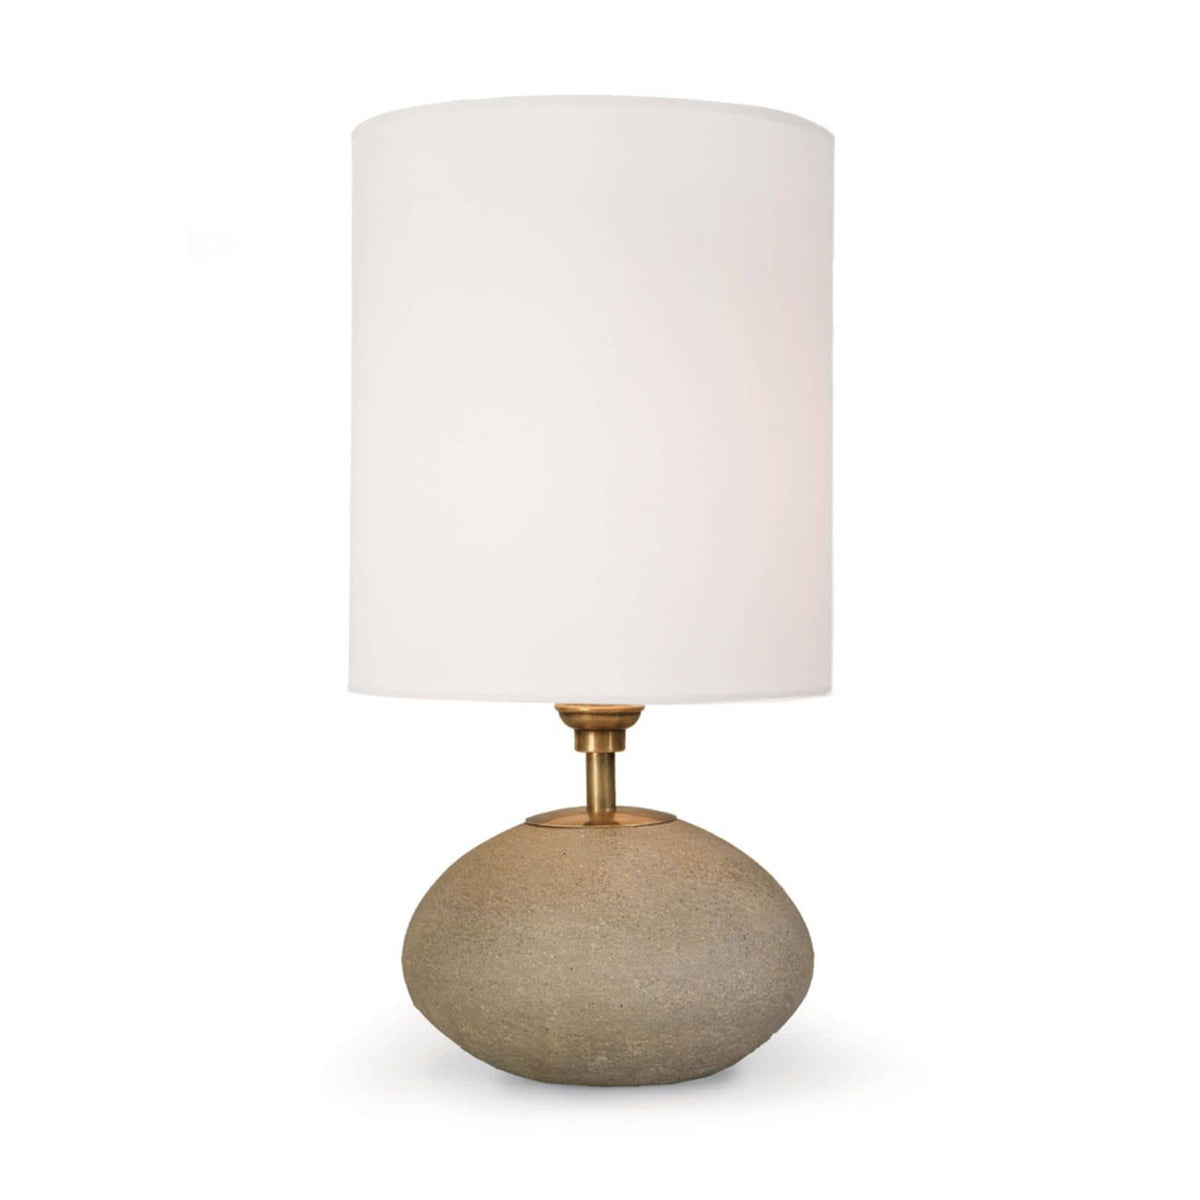 Concrete lamp with natural linen shade